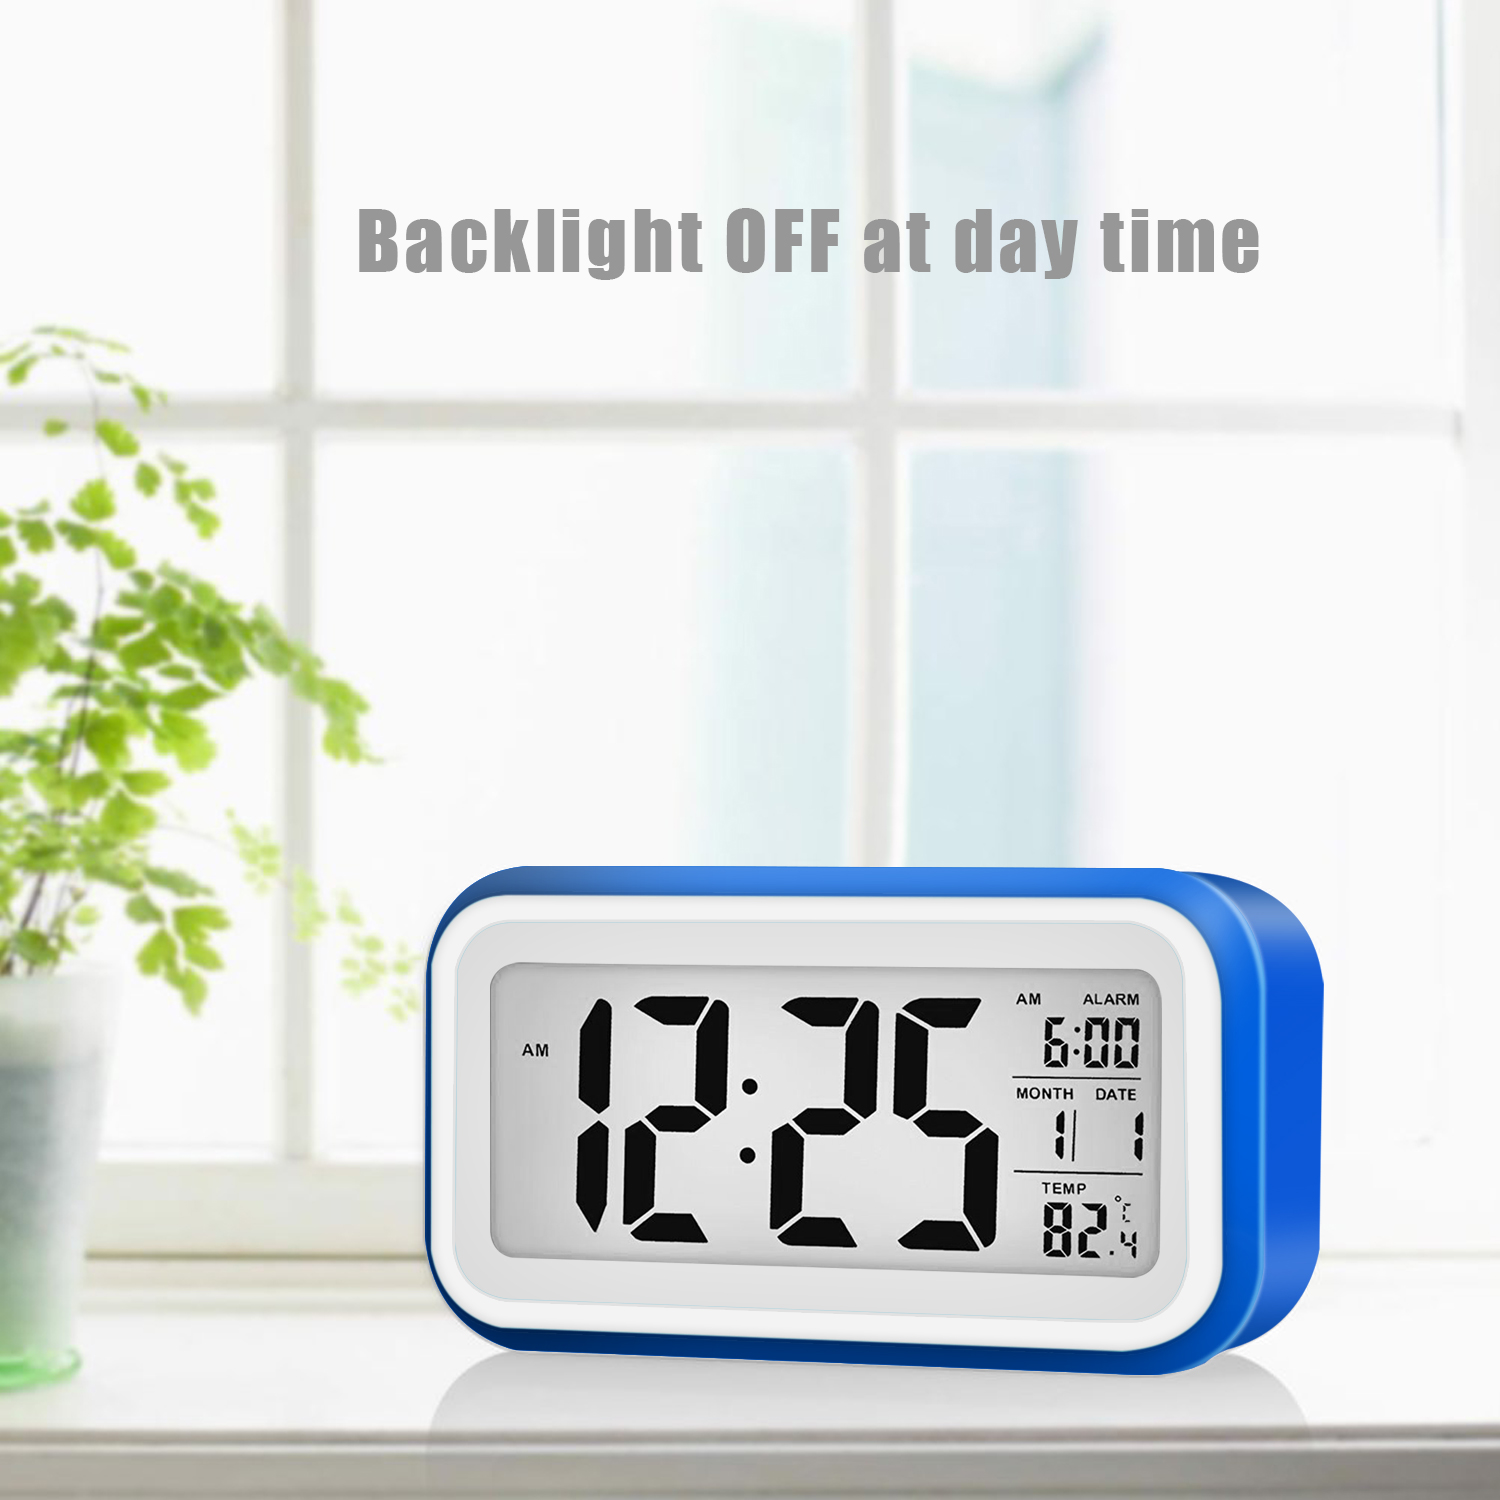 Digital-LCD-Display-Alarm-Clock-With-1224-Hour-Switchable-Time-Date-Week-Temperature-Night-Lights-1255765